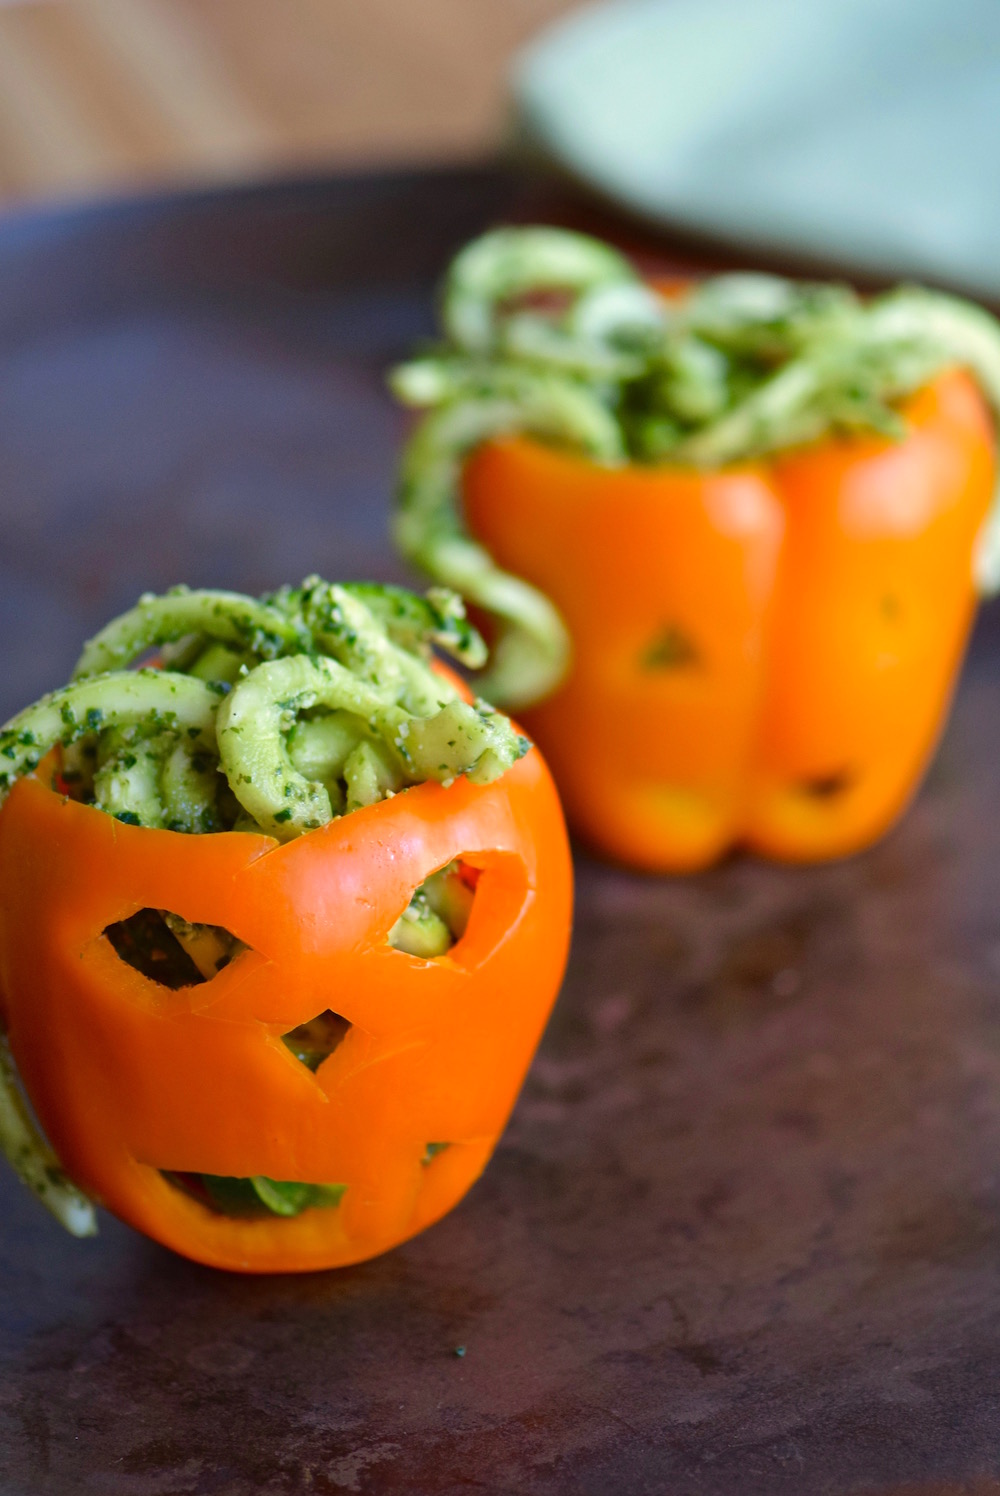 Jack O'Lantern Peppers filled with a zoodle brains